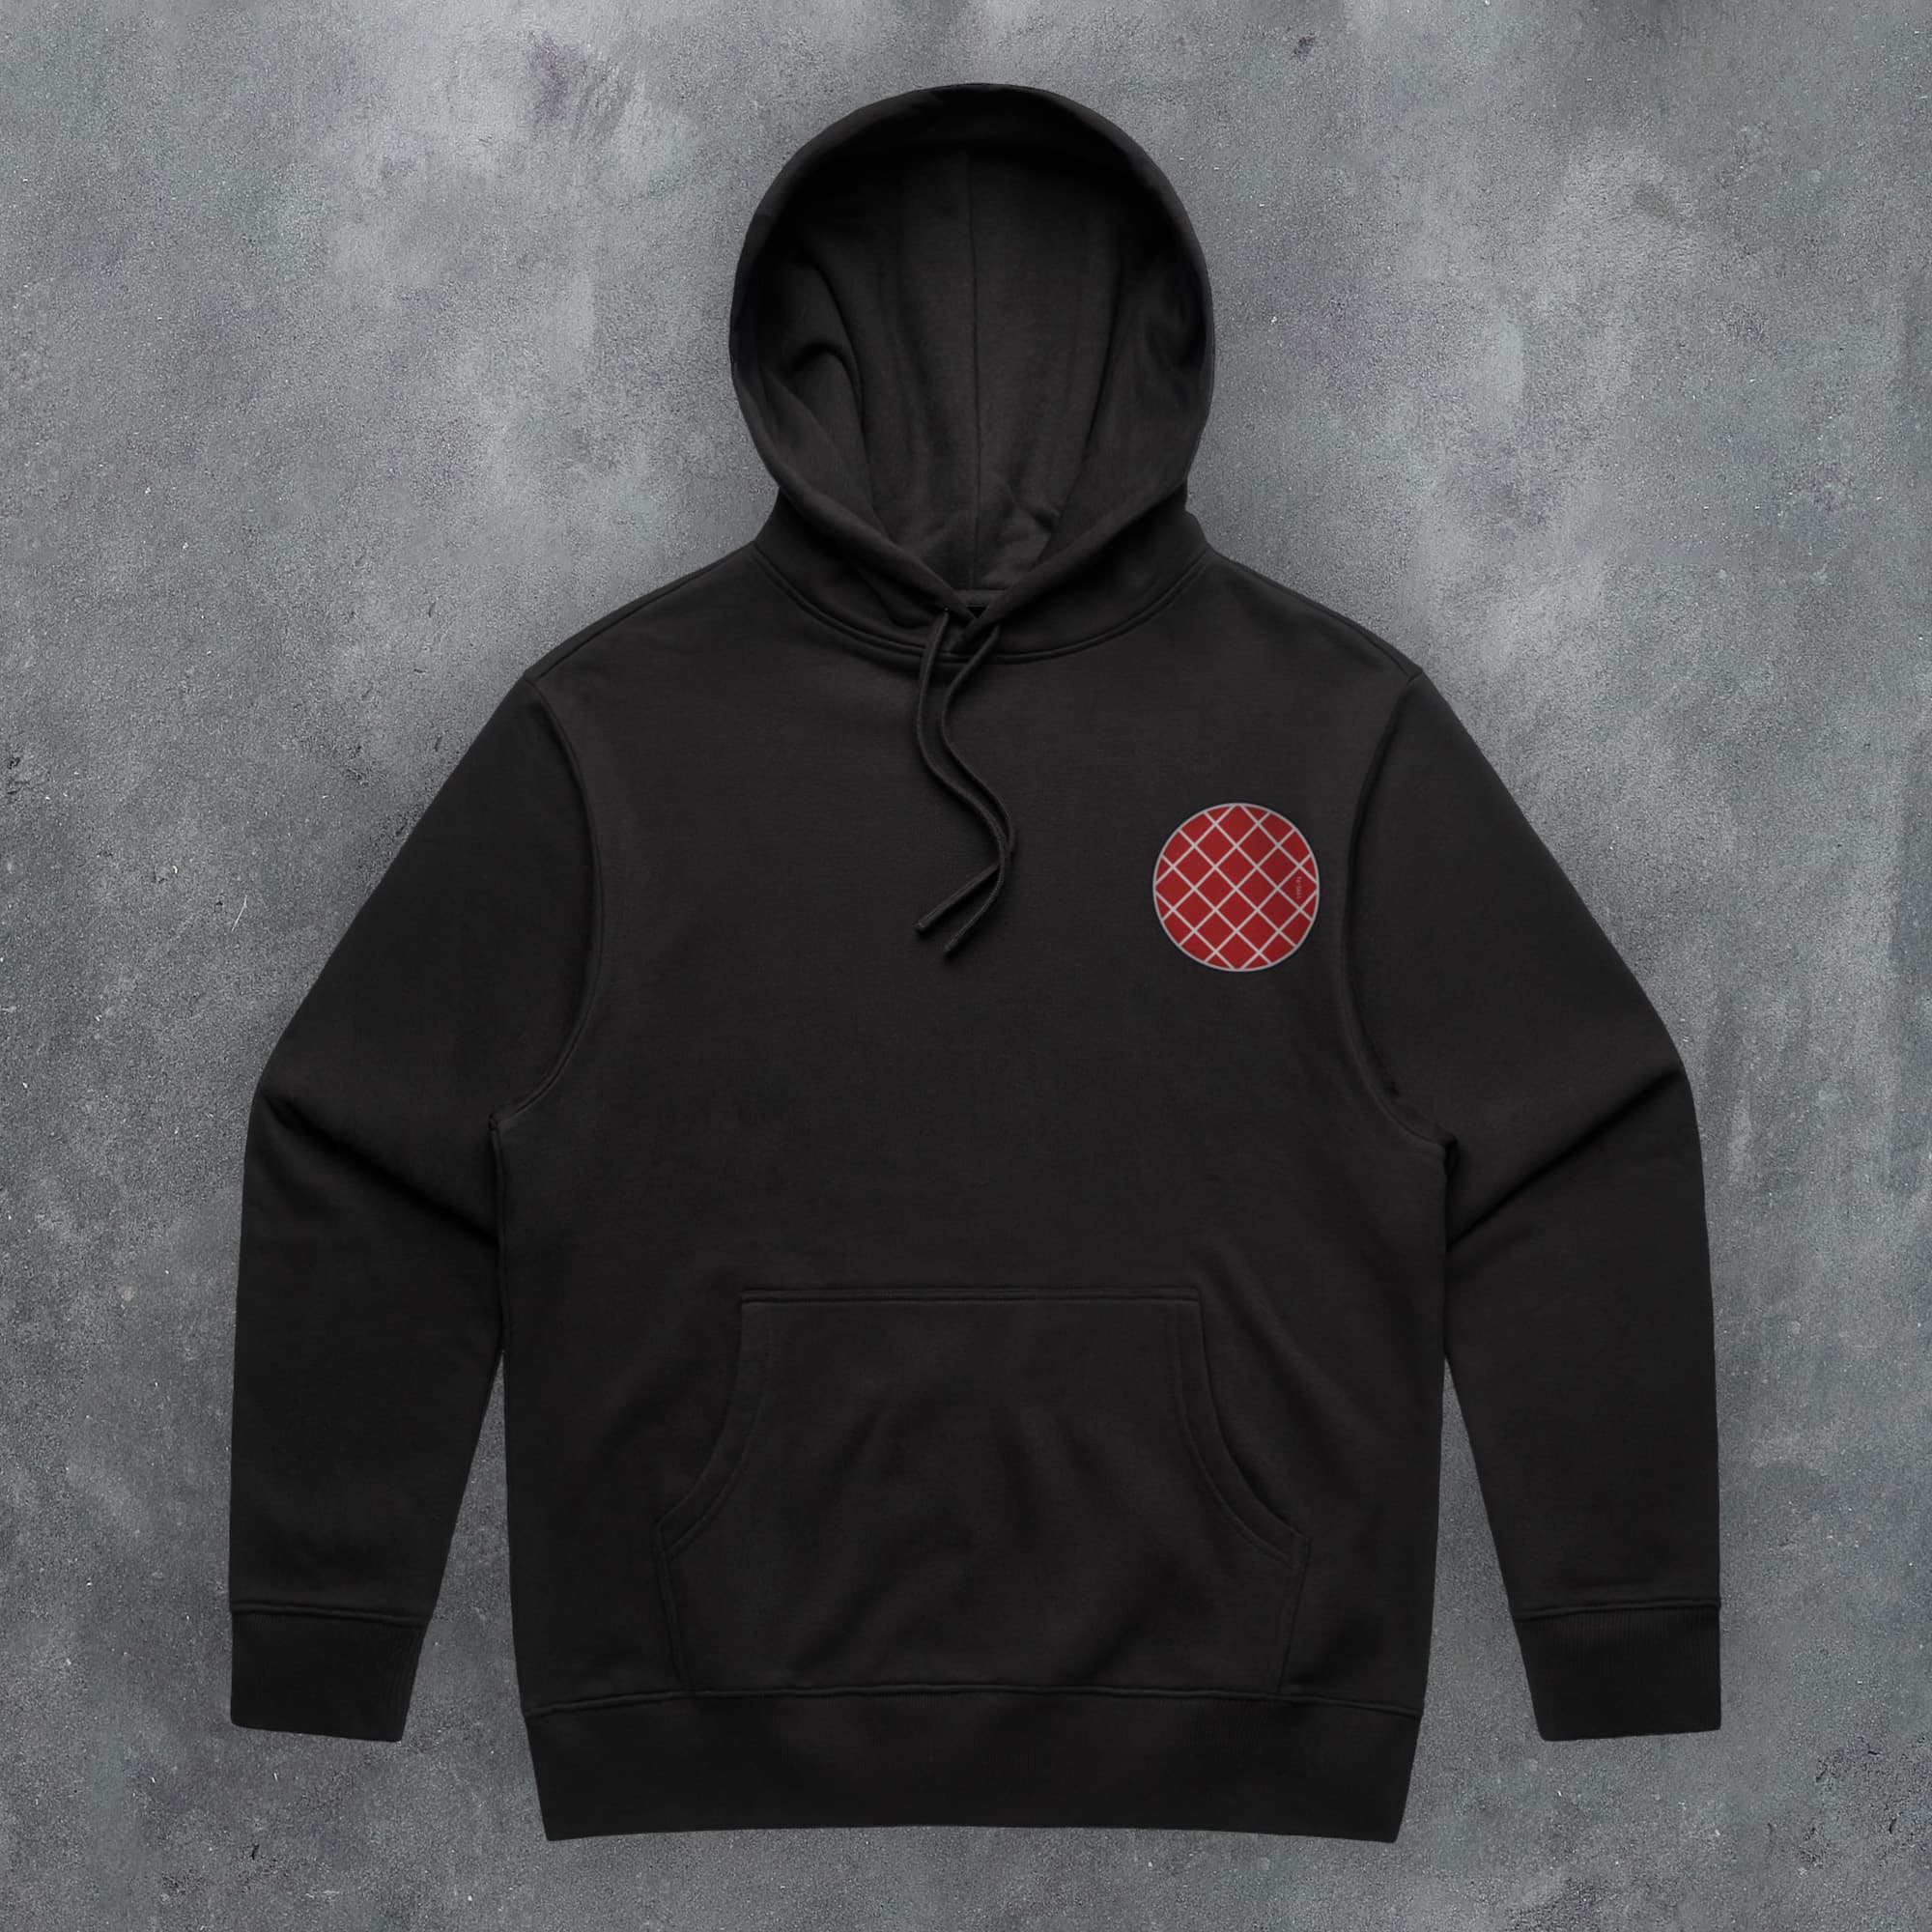 a black hoodie with a red checkered circle on it